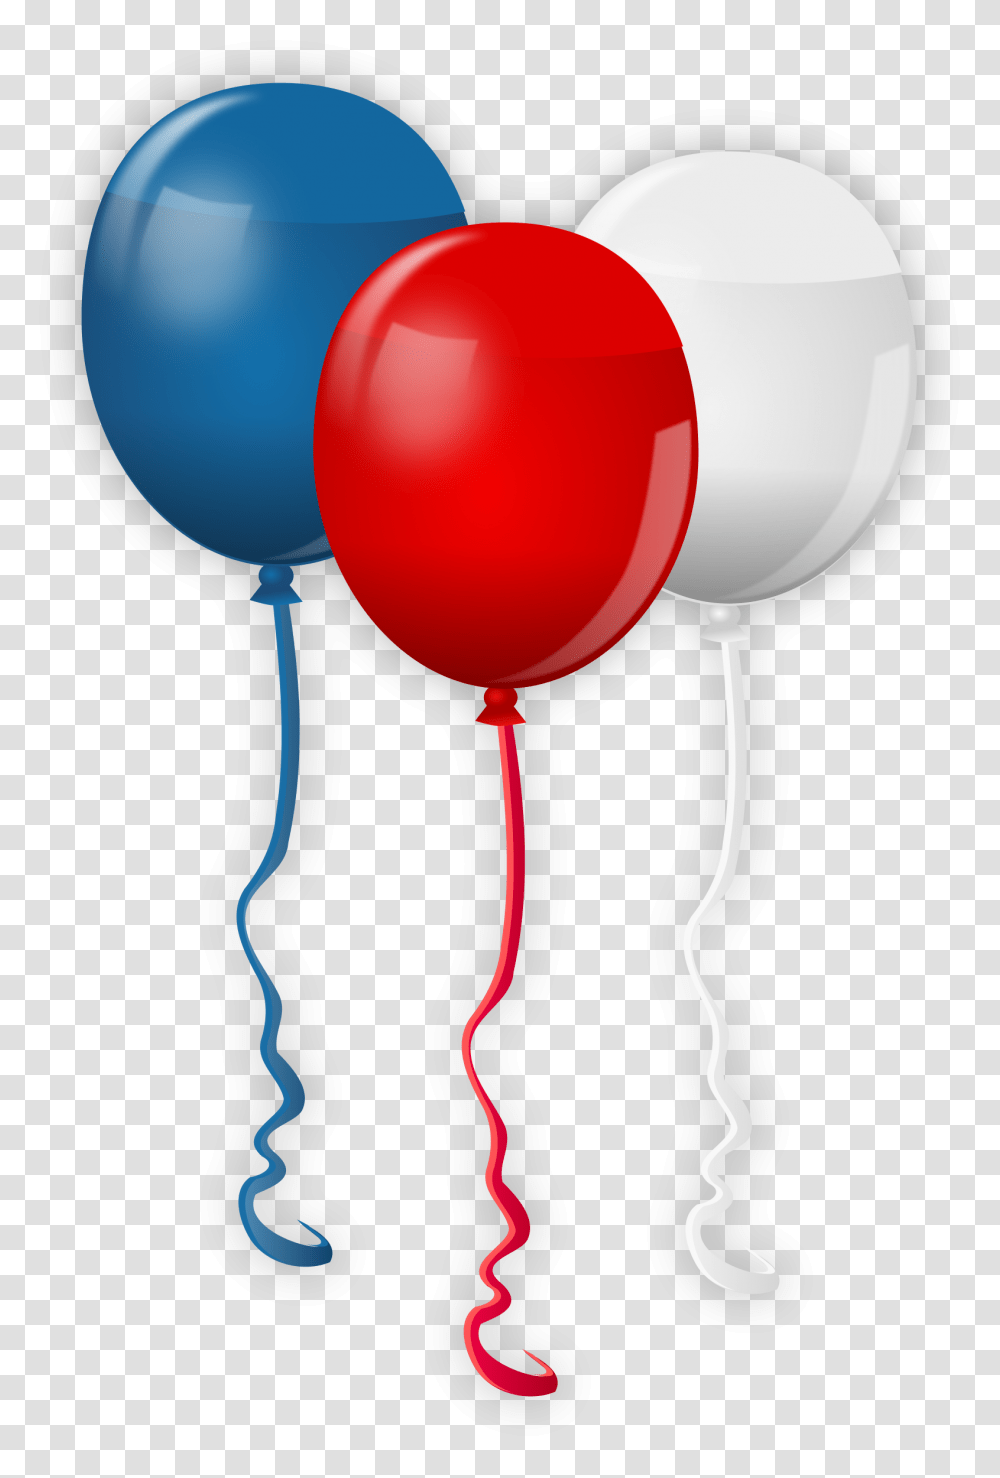 Chevron Arrow Clipart No School Monday Labor Day Red And Blue Balloons Transparent Png